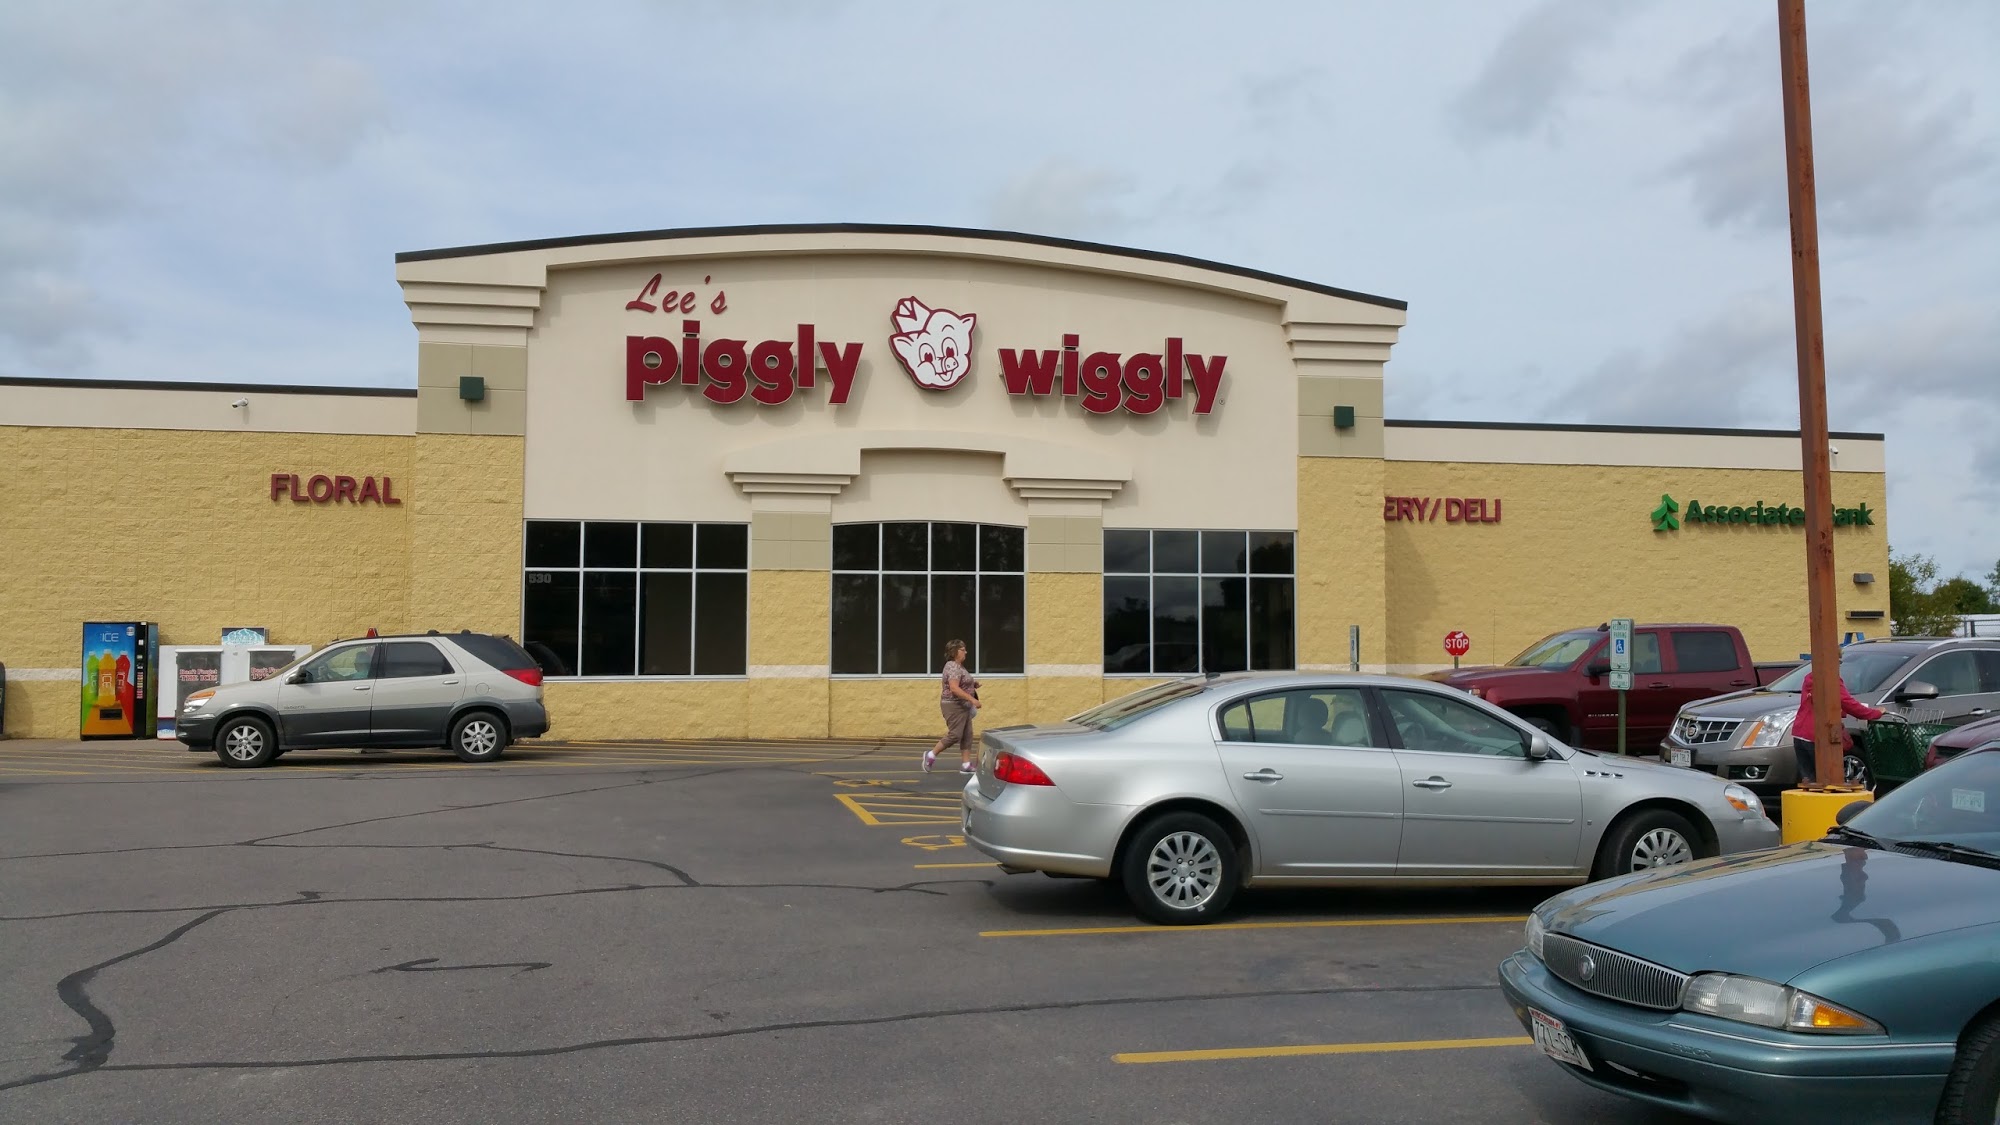 Lee’s Piggly Wiggly